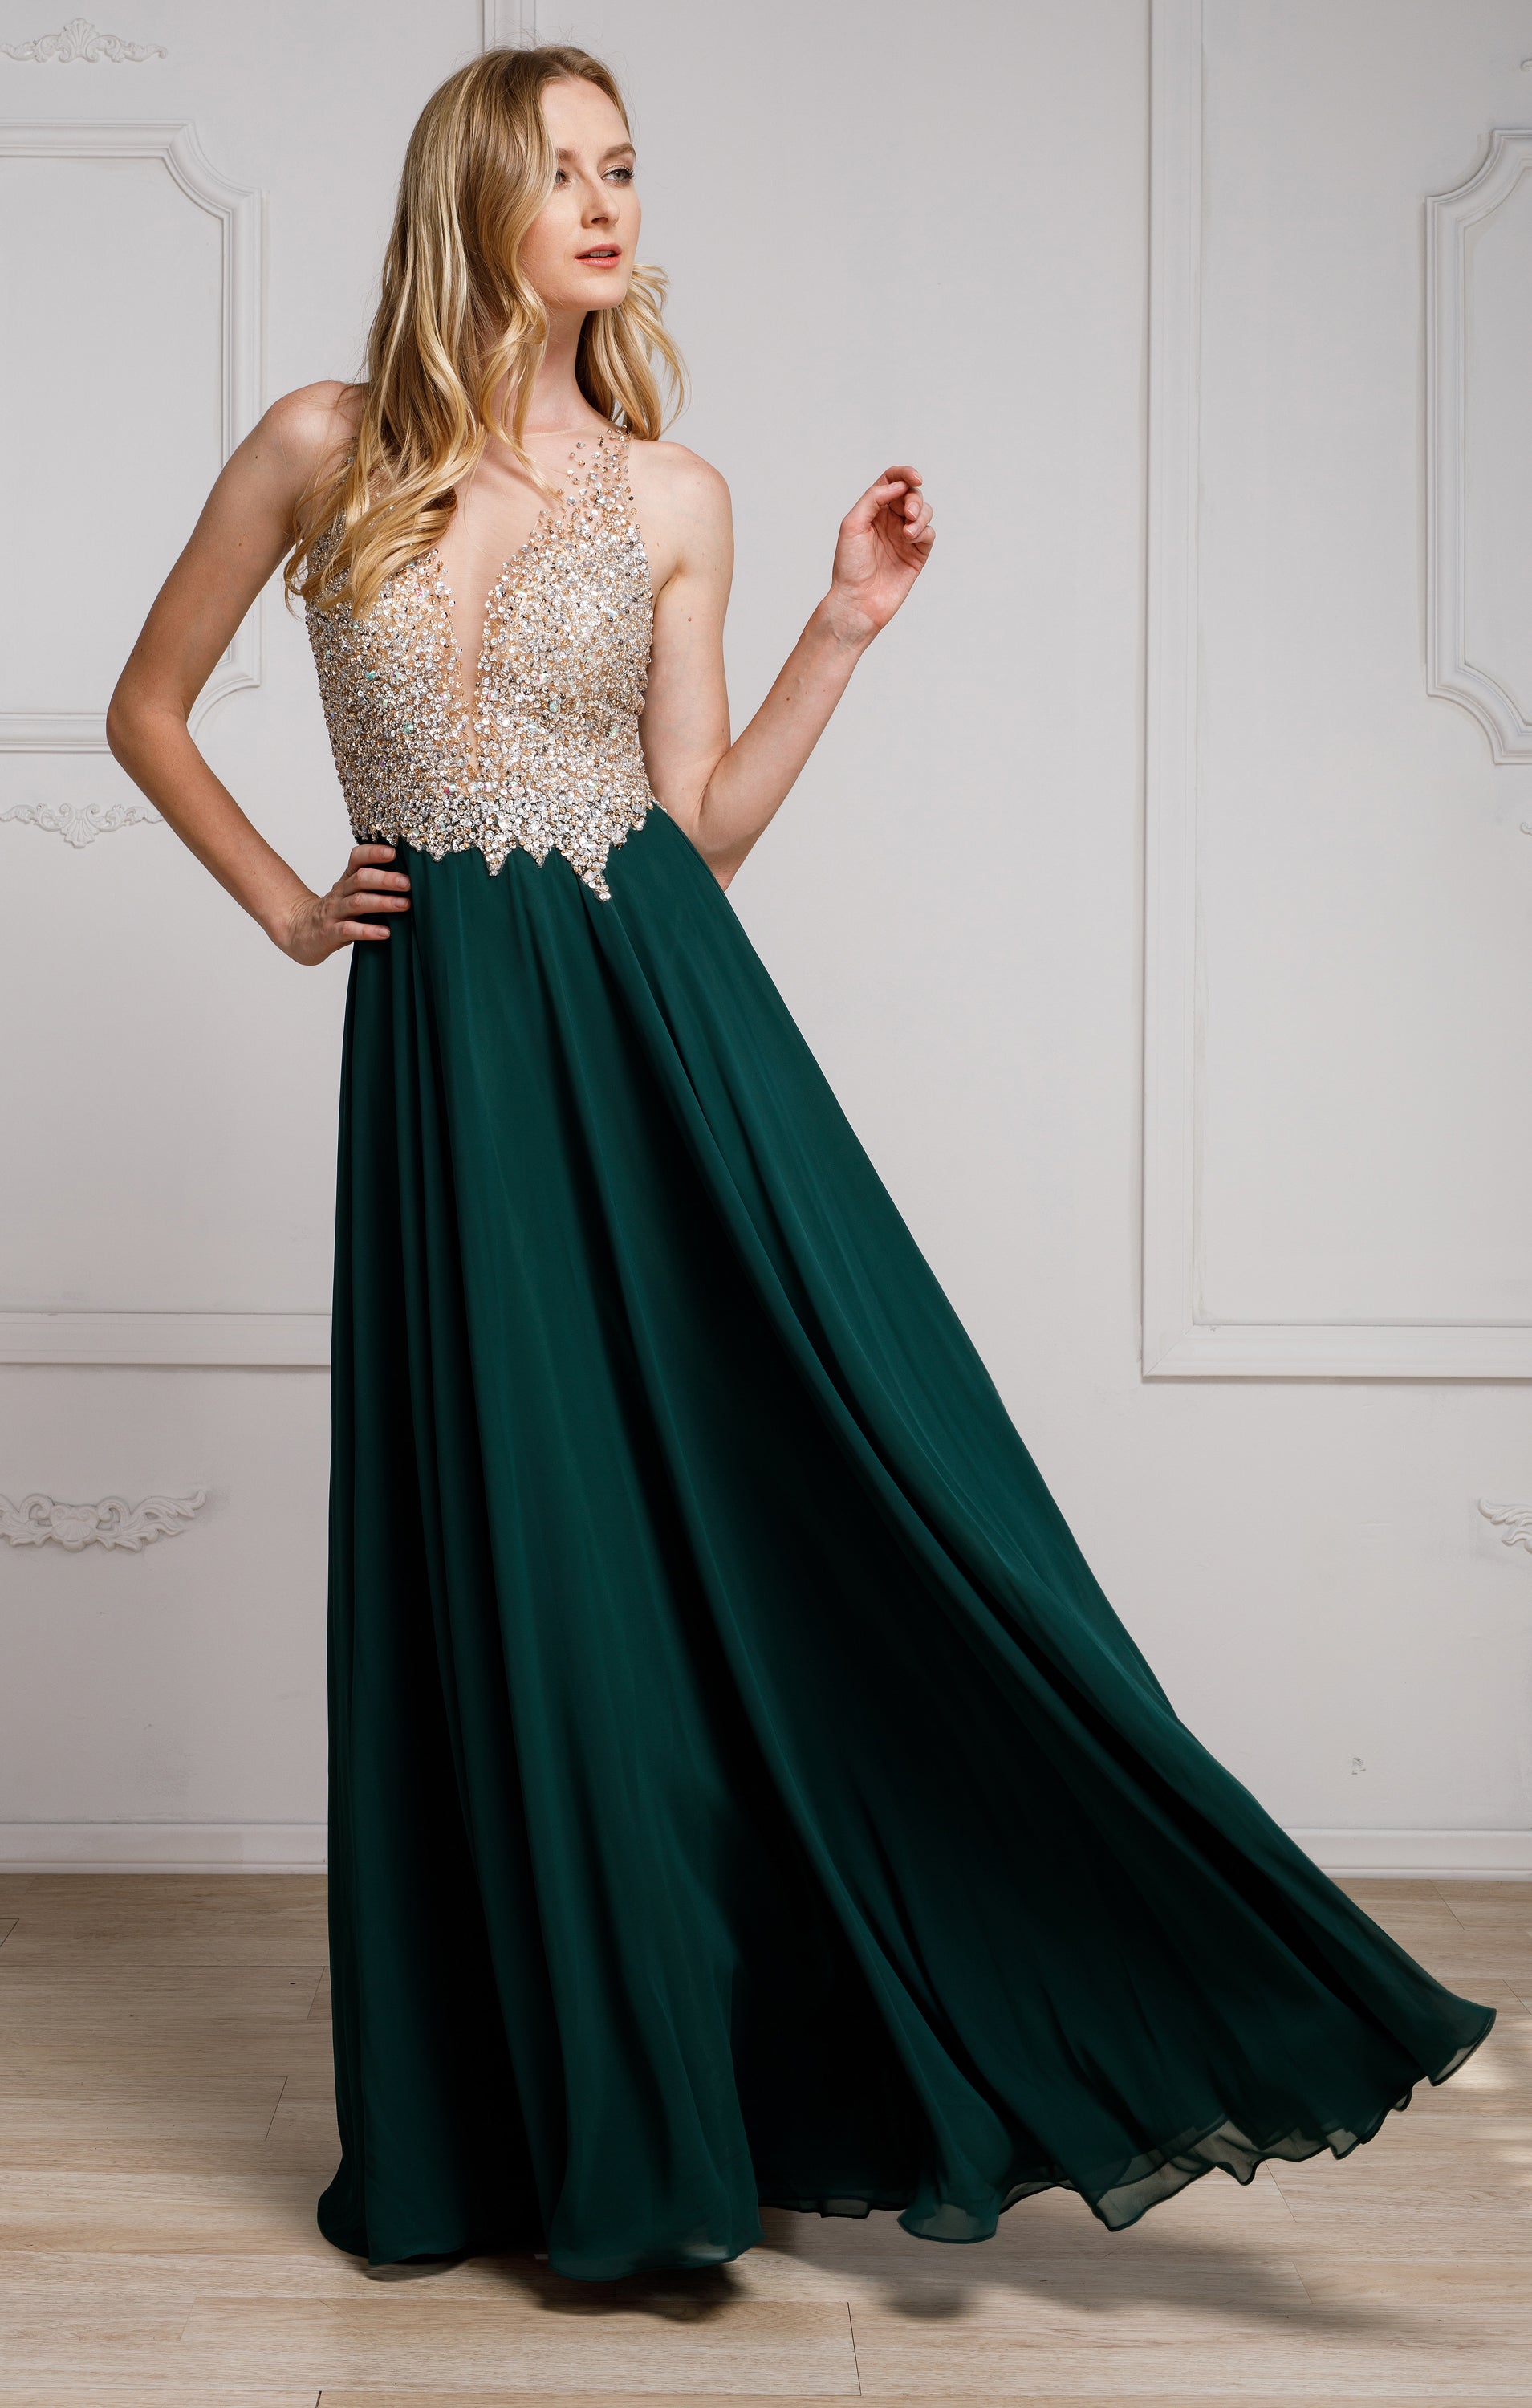 Main image of Sequined Plunging Neckine Prom Gown